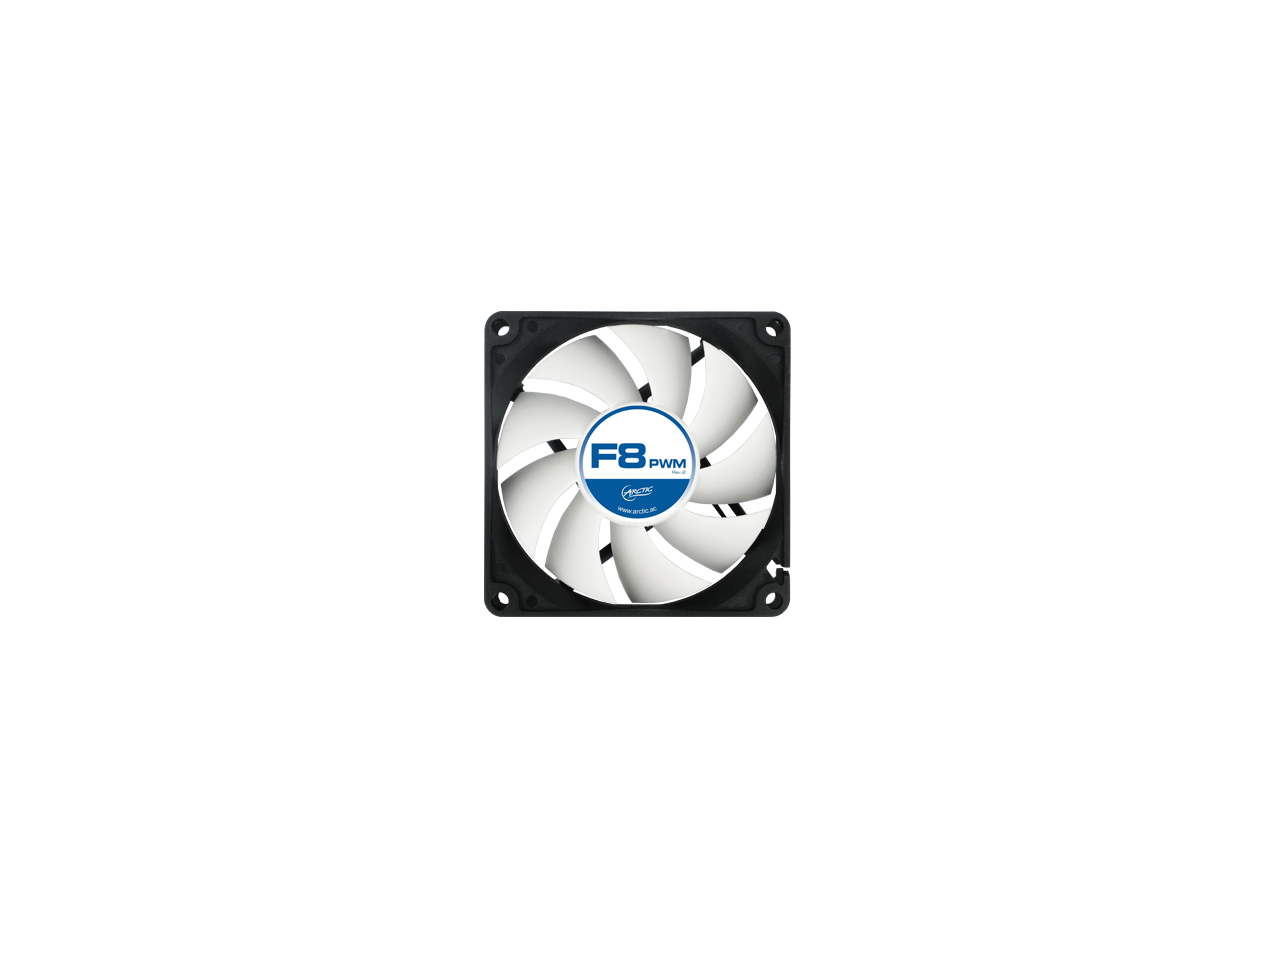 Arctic Cooling F8 PWM 4-Pin PWM fan with standard case Model AFACO-080P2-GBA01